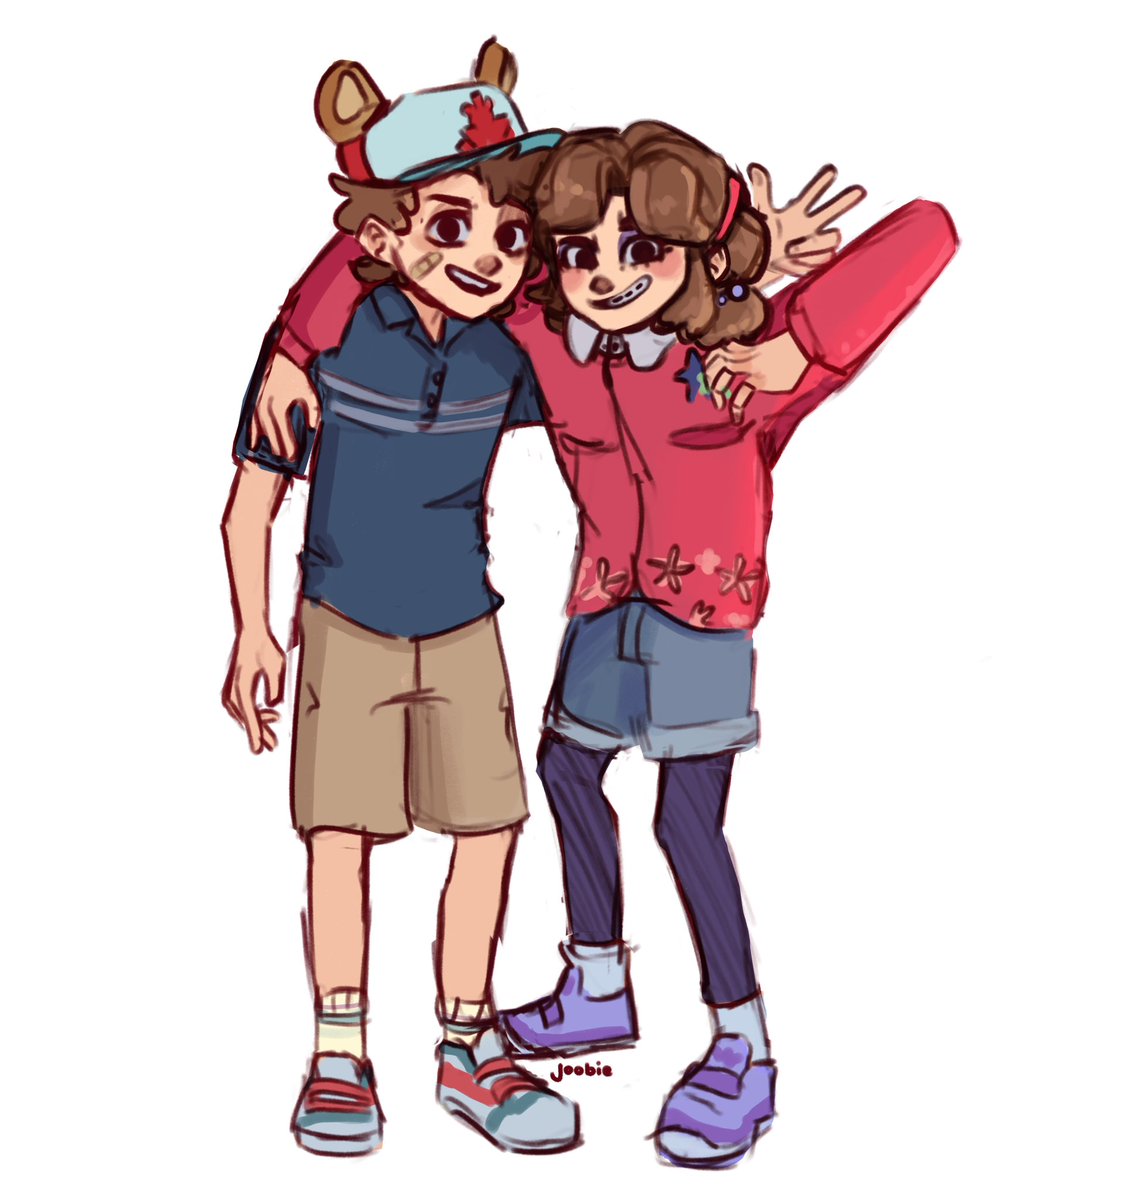 Dipper and Mabel as Gregory and Cassie :] #fnaf #SecurityBreach #securitybreachruin #gregoryfnaf #cassiefnaf #fnaffanart #GravityFalls #dipperpines #mabelpines #GravityFallsfanart